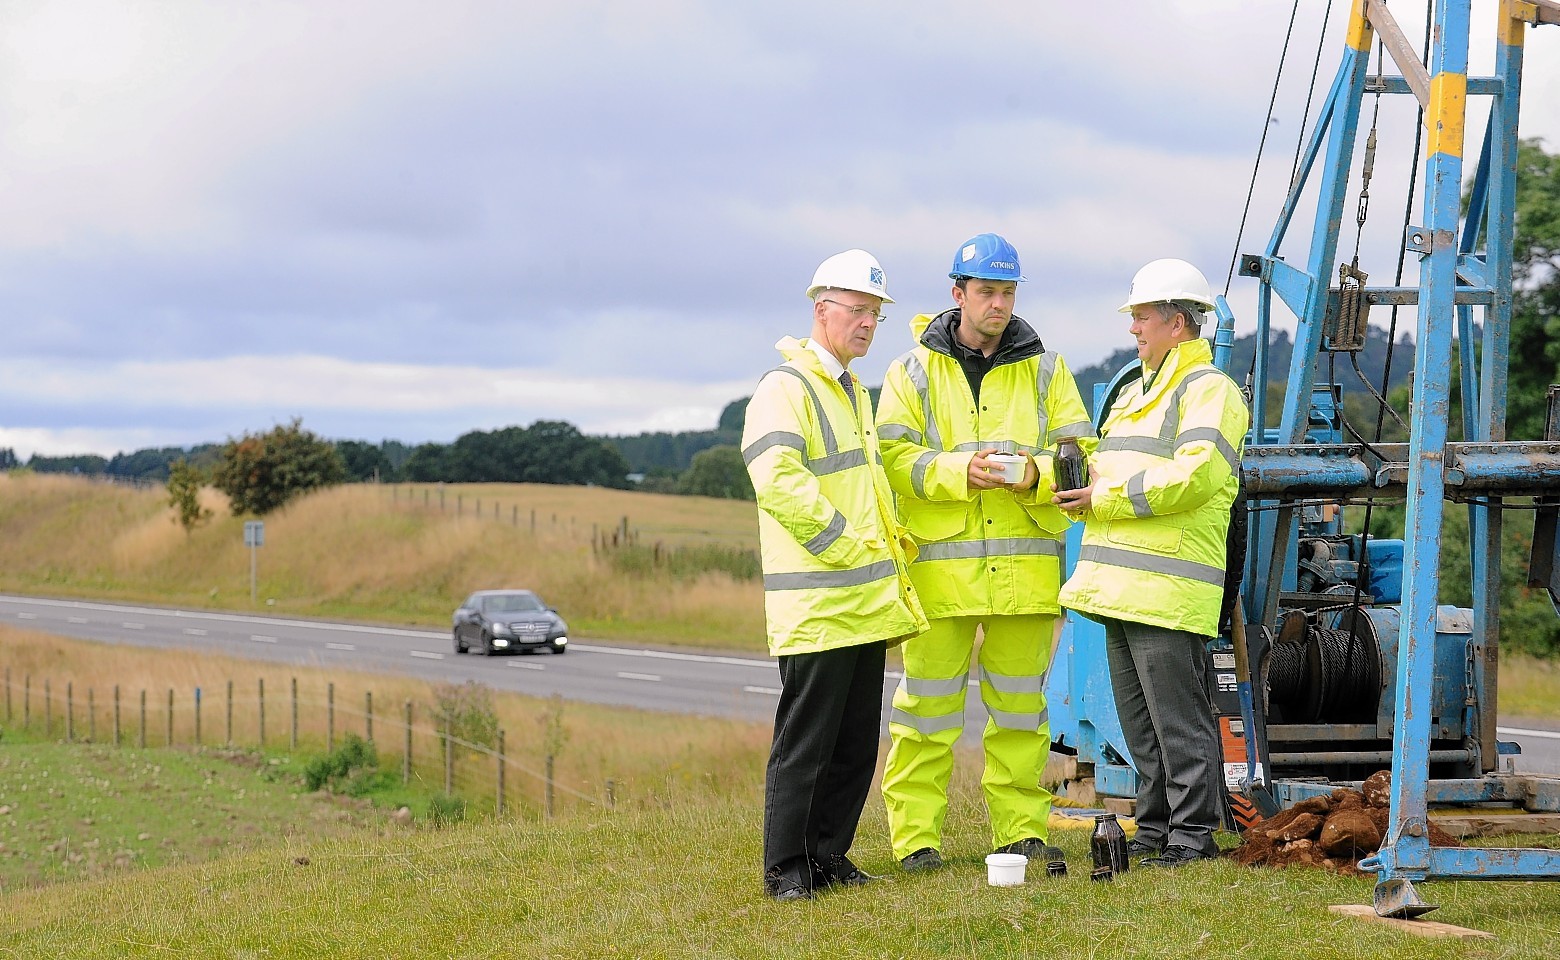 Keith Brown observes the work on the A9